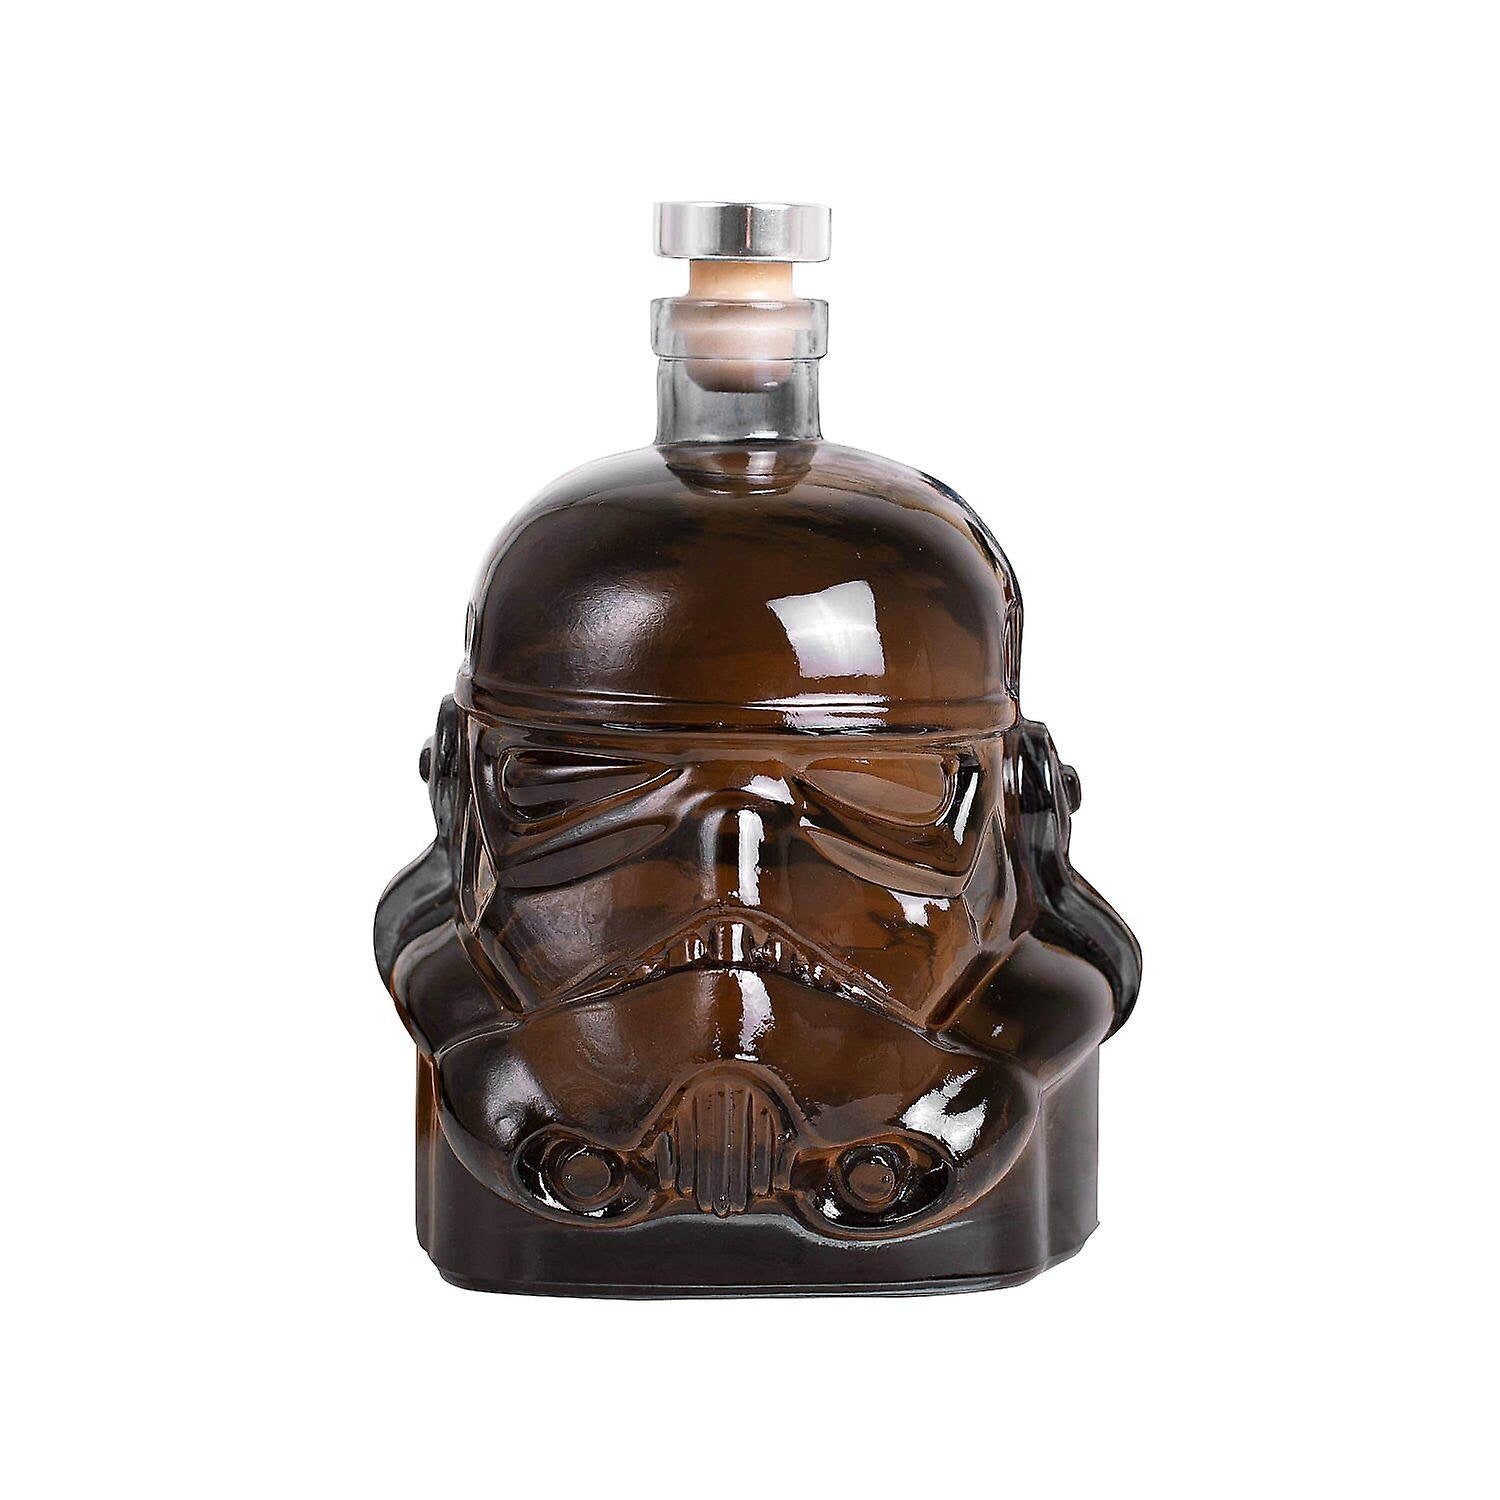 Iconic Stormtroopers Whiskey Glass Decanter. Star Wars Bottle. 750